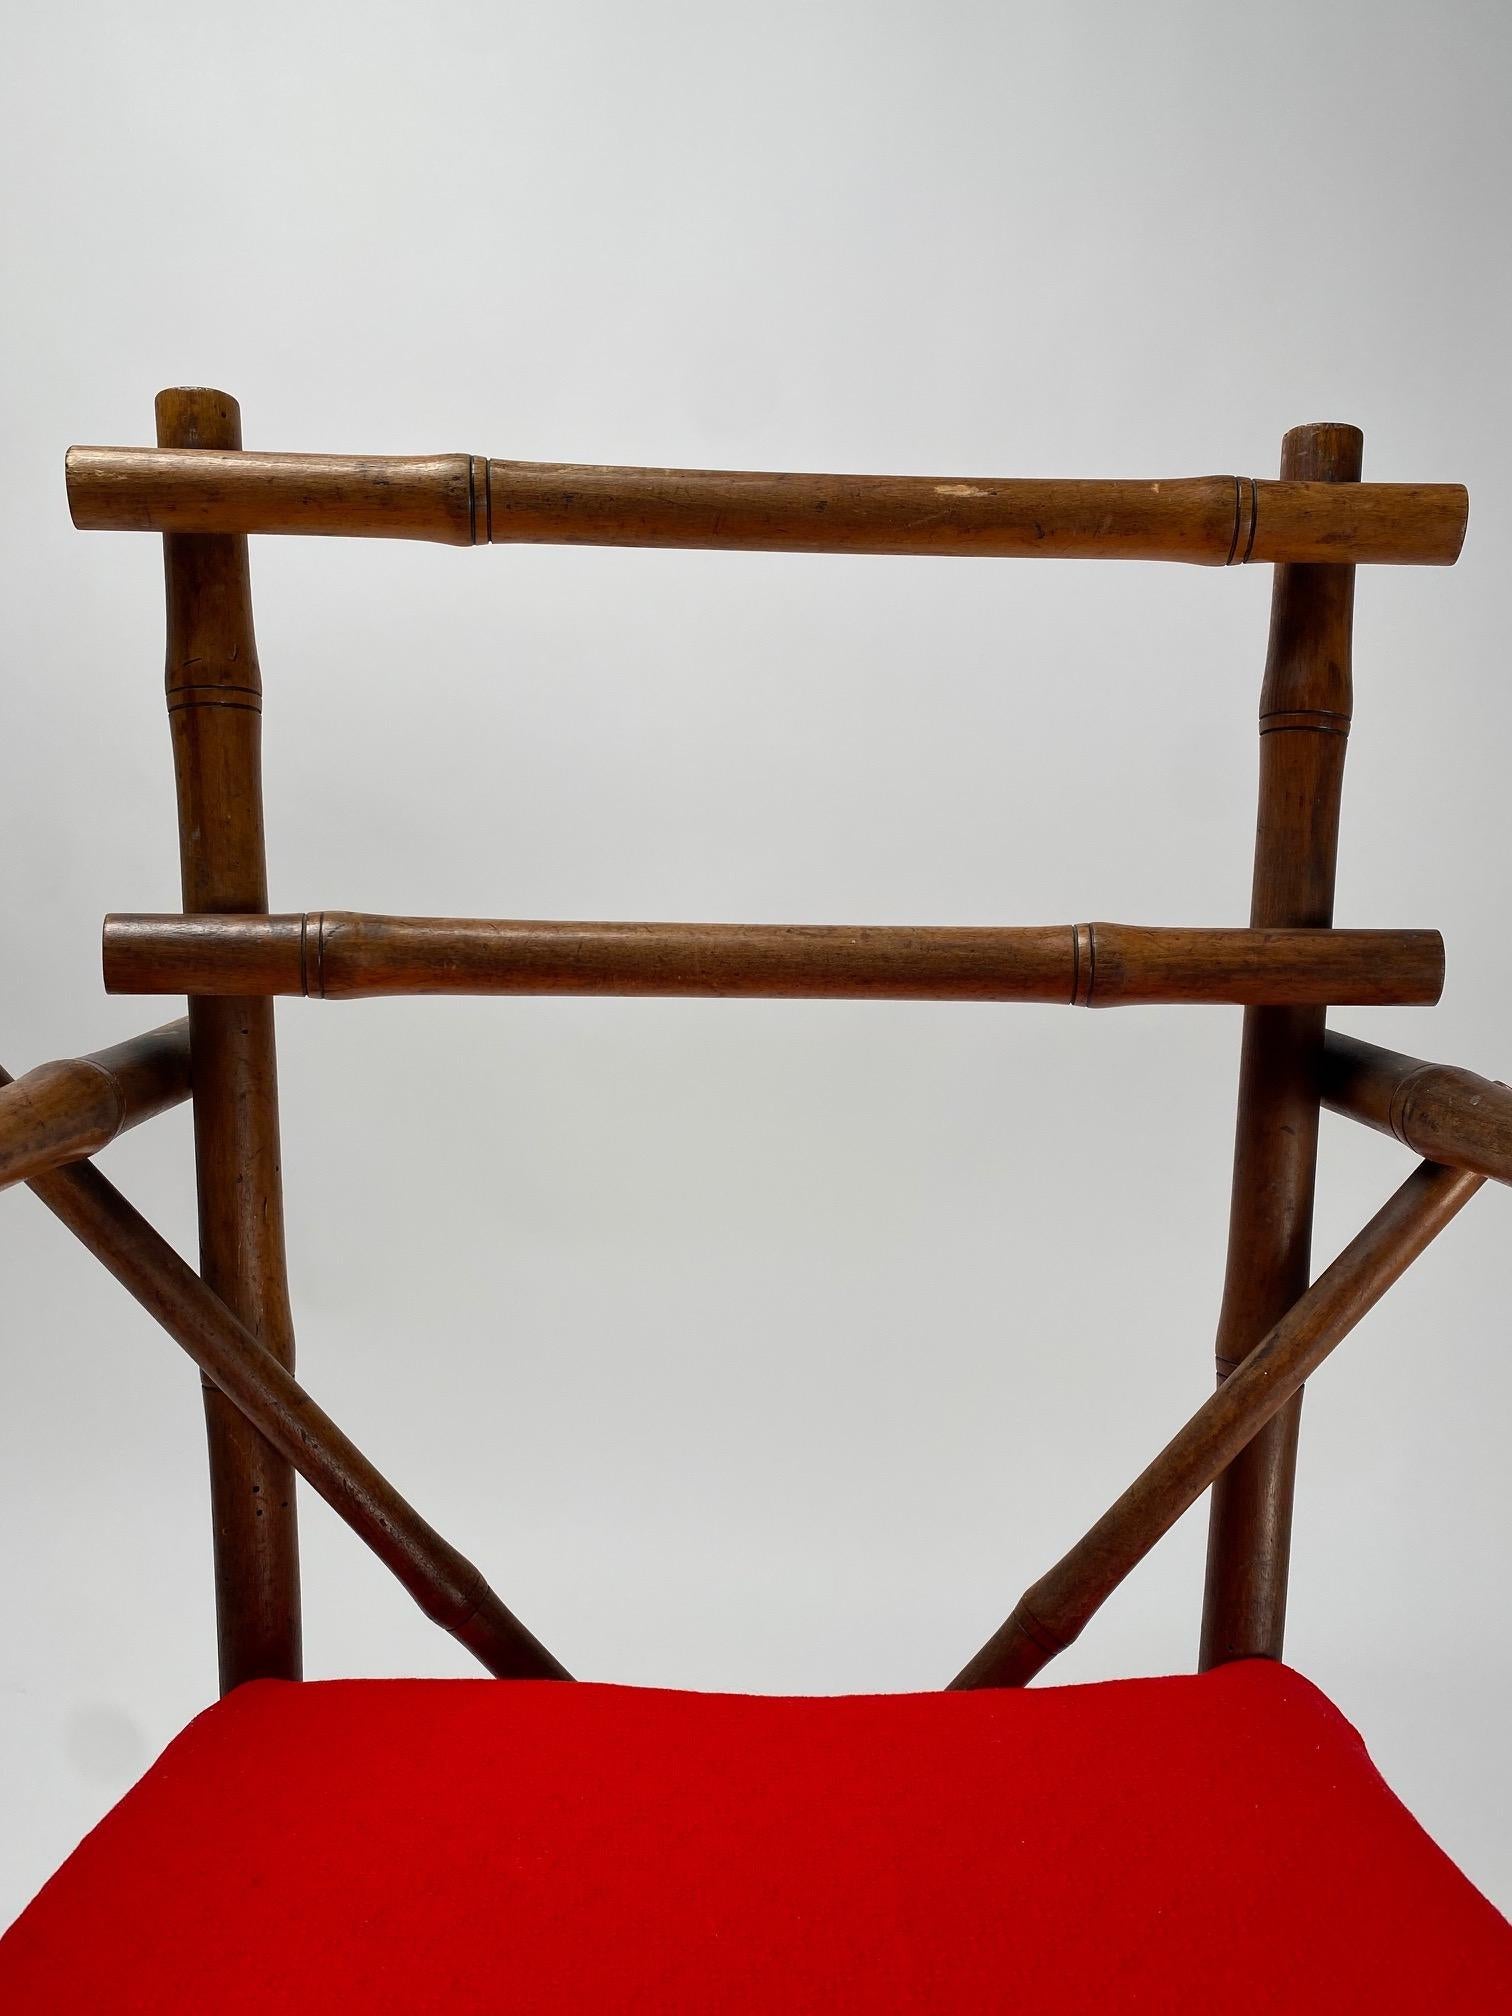 Sculptural Bamboo Chair, Italy 1900s For Sale 2